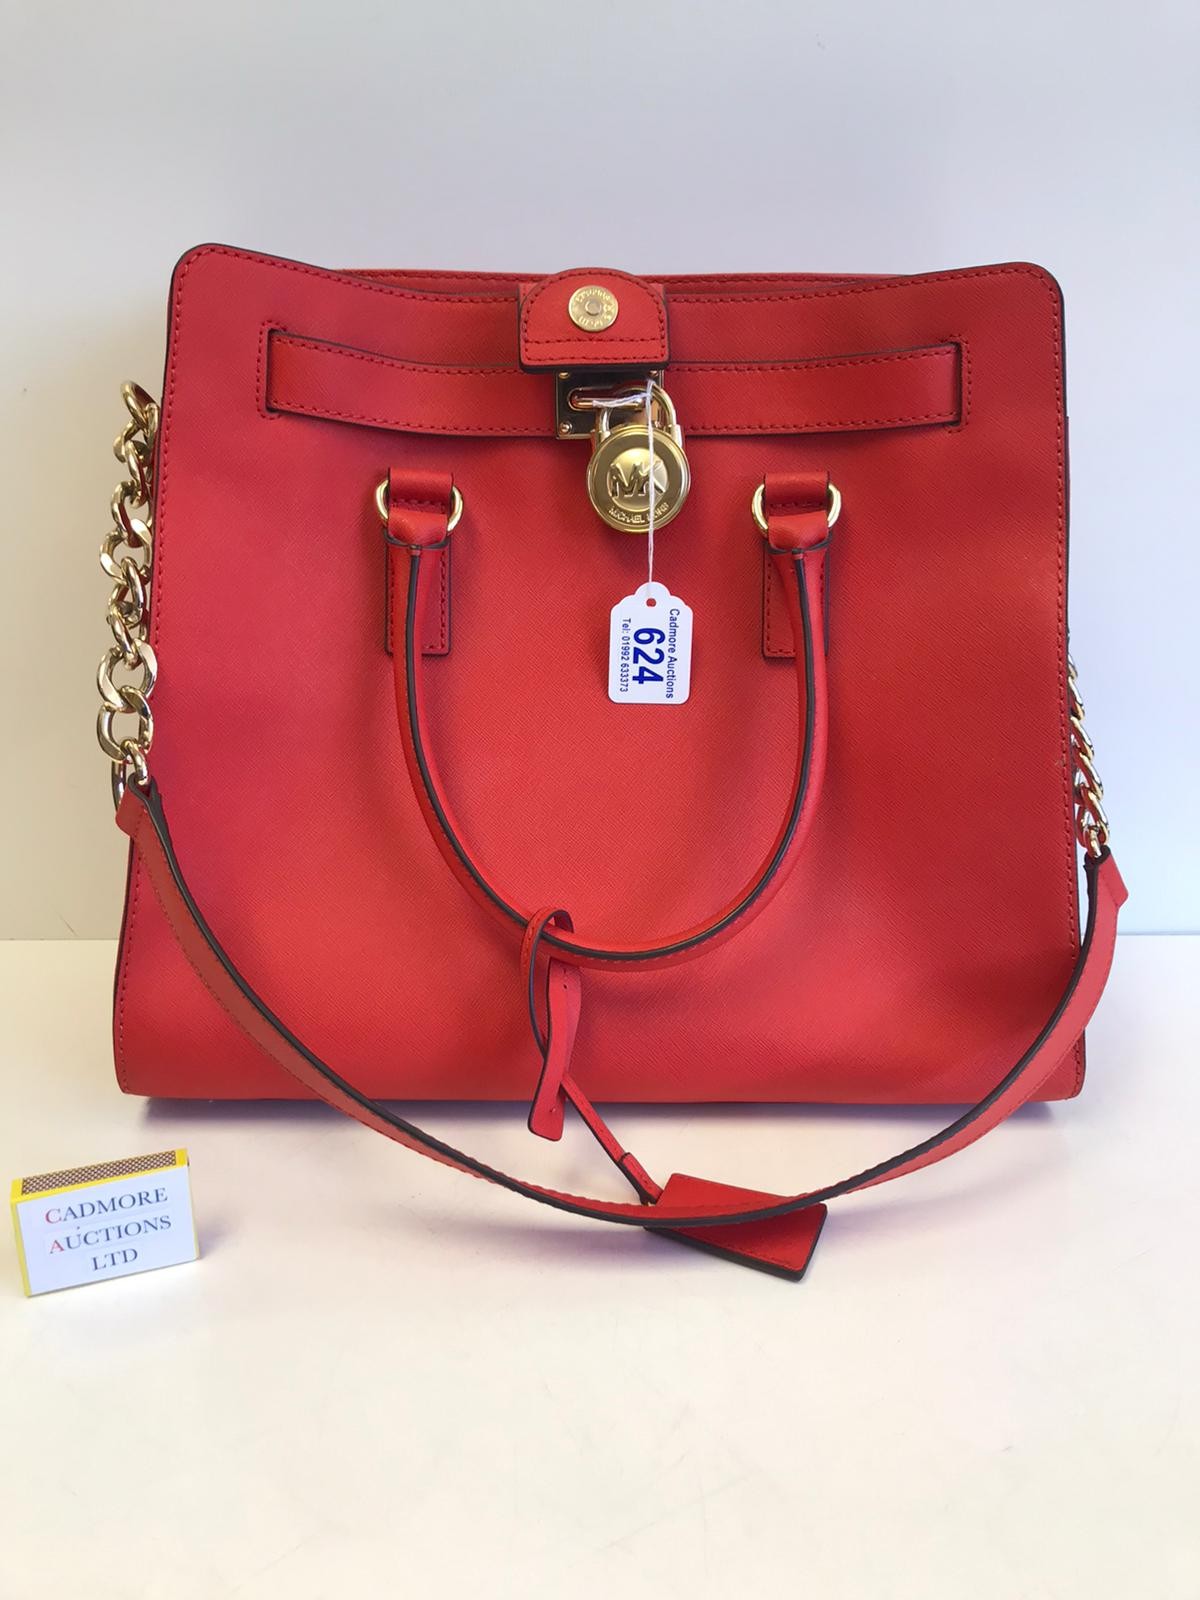 A Red Michael Kors Handbag serial number 6736968 37 cm wide x height 33 cm  As new condition